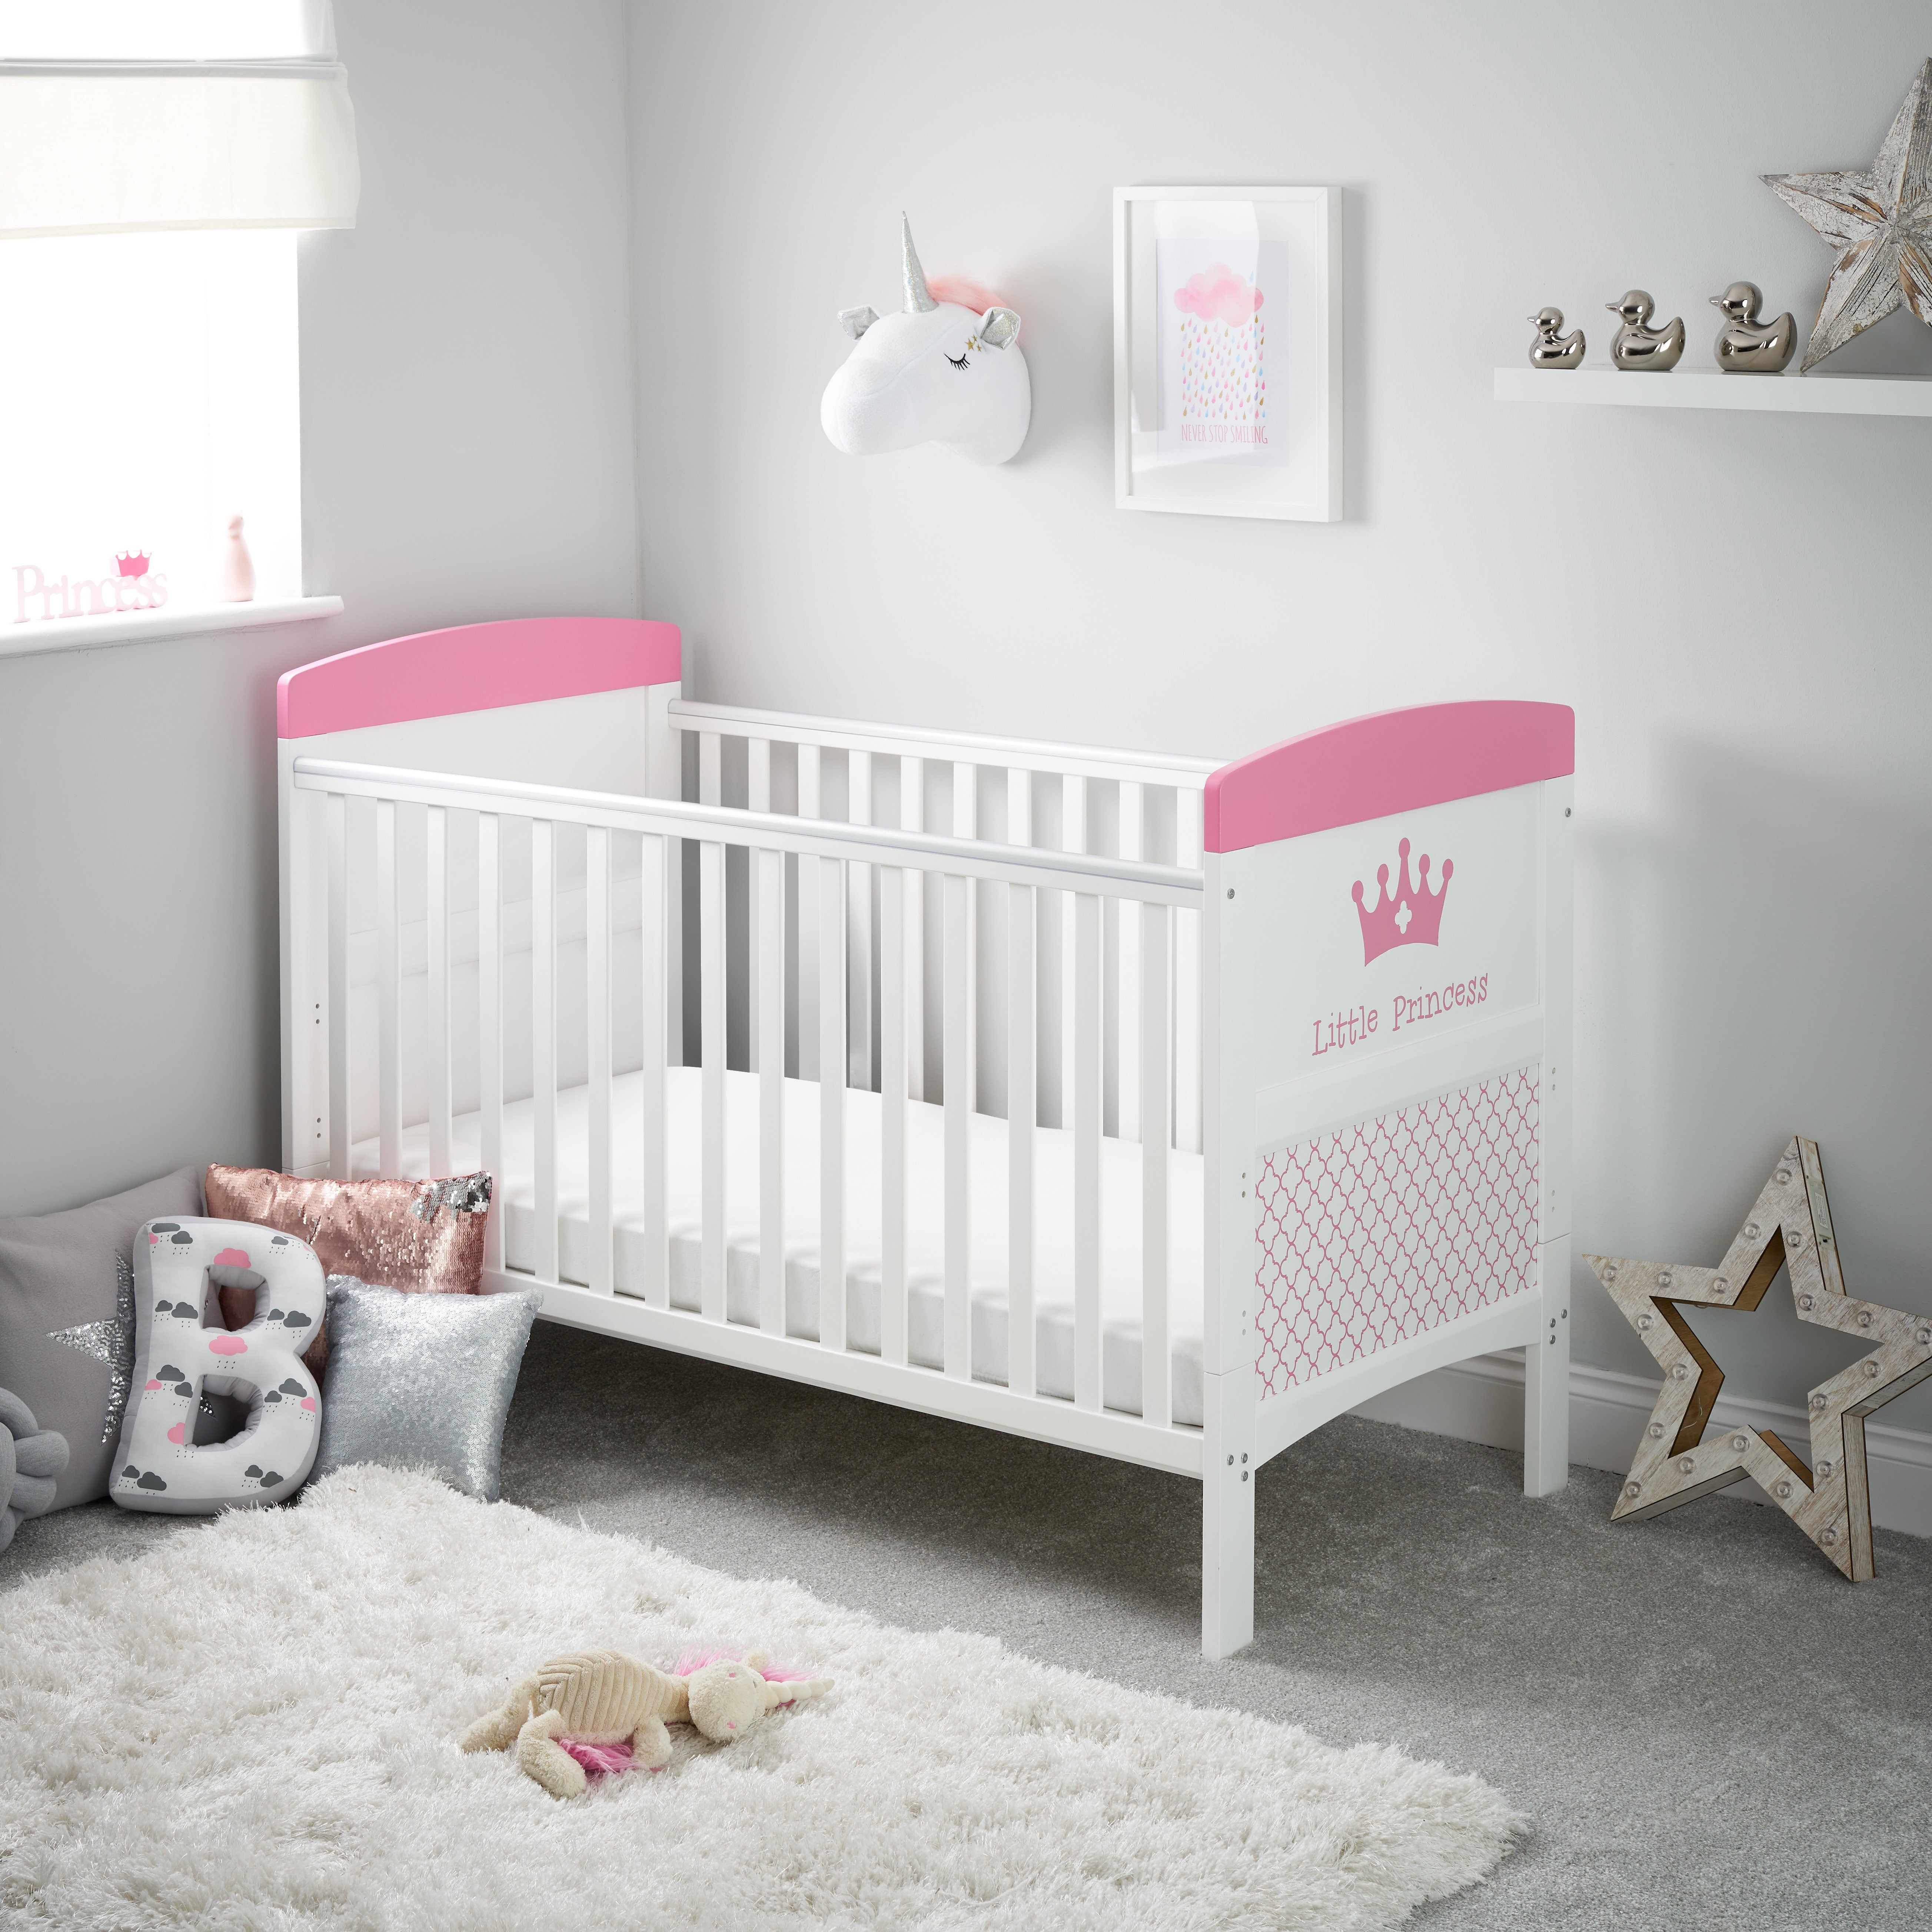 Obaby Grace Inspire Little Princess Cot Bed - White - image 1